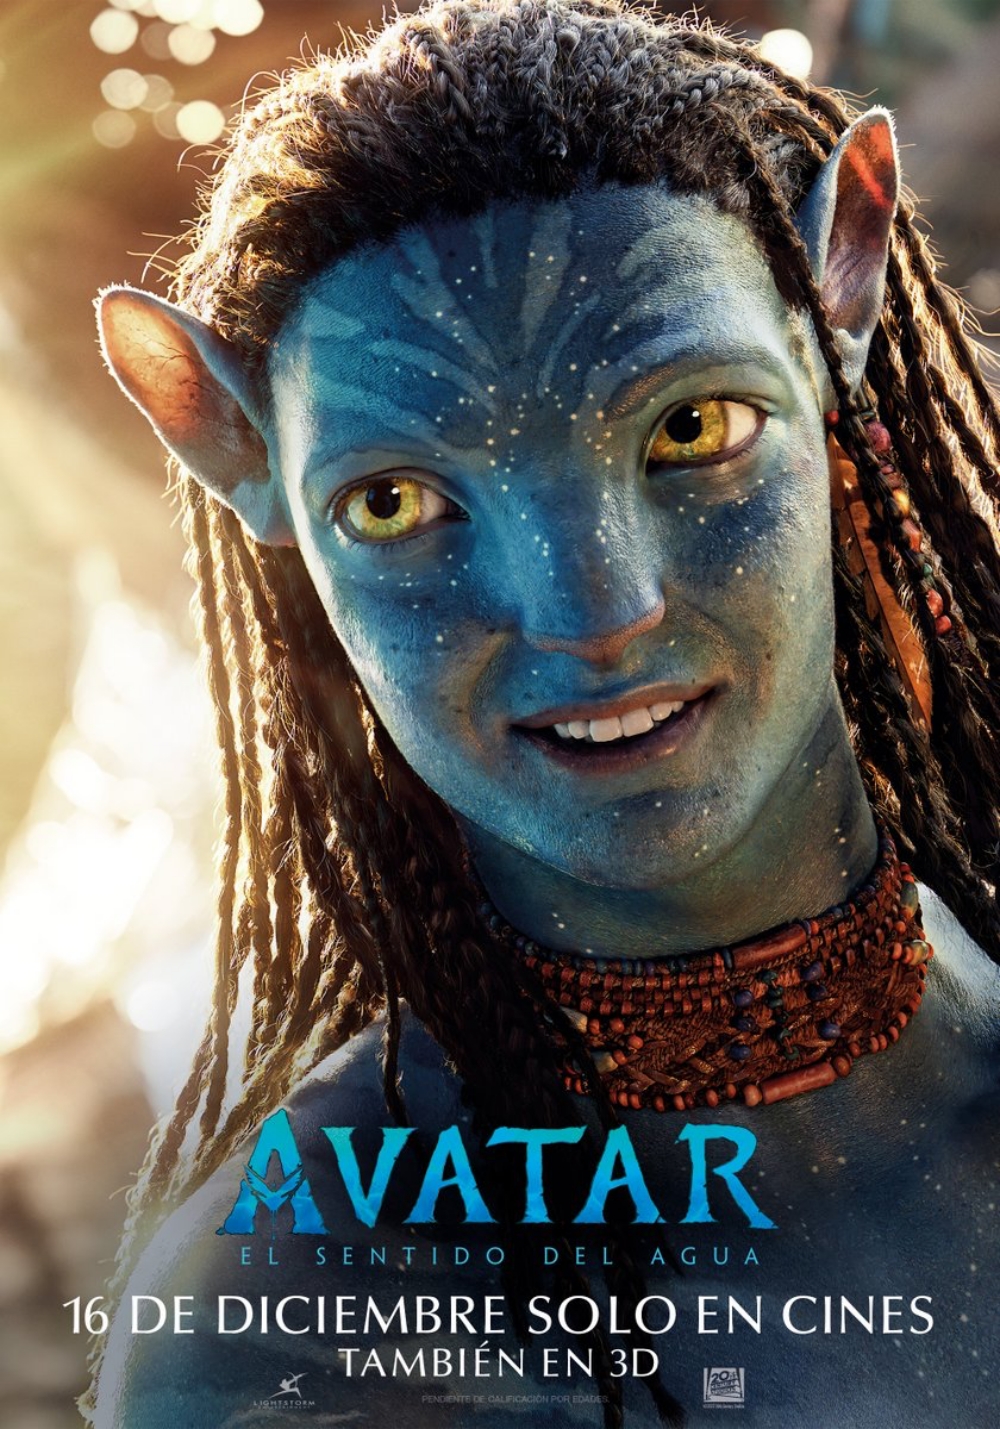 Avatar 2 The Way of Water Cast Home Video Release Date Runtime  Streaming  Parade Entertainment Recipes Health Life Holidays